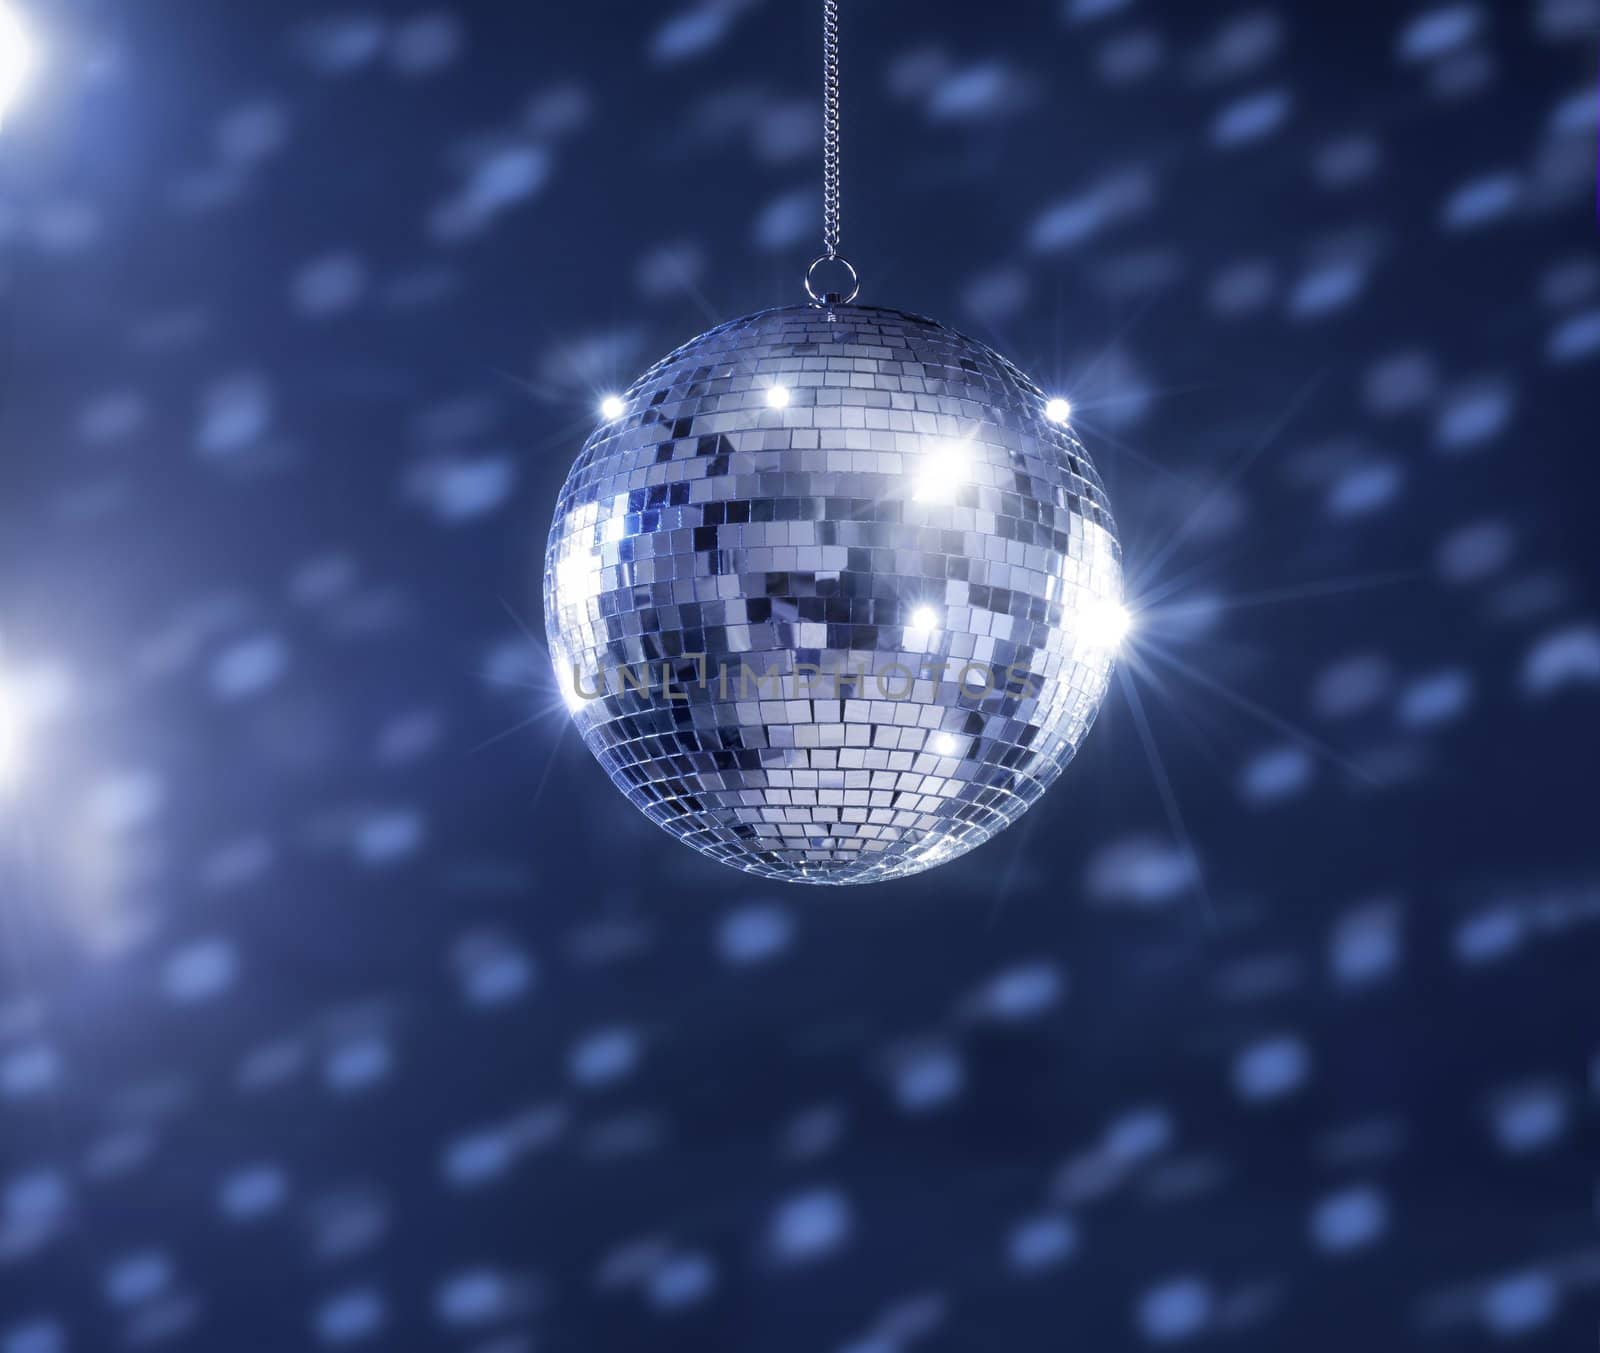 Disco Time by Stocksnapper